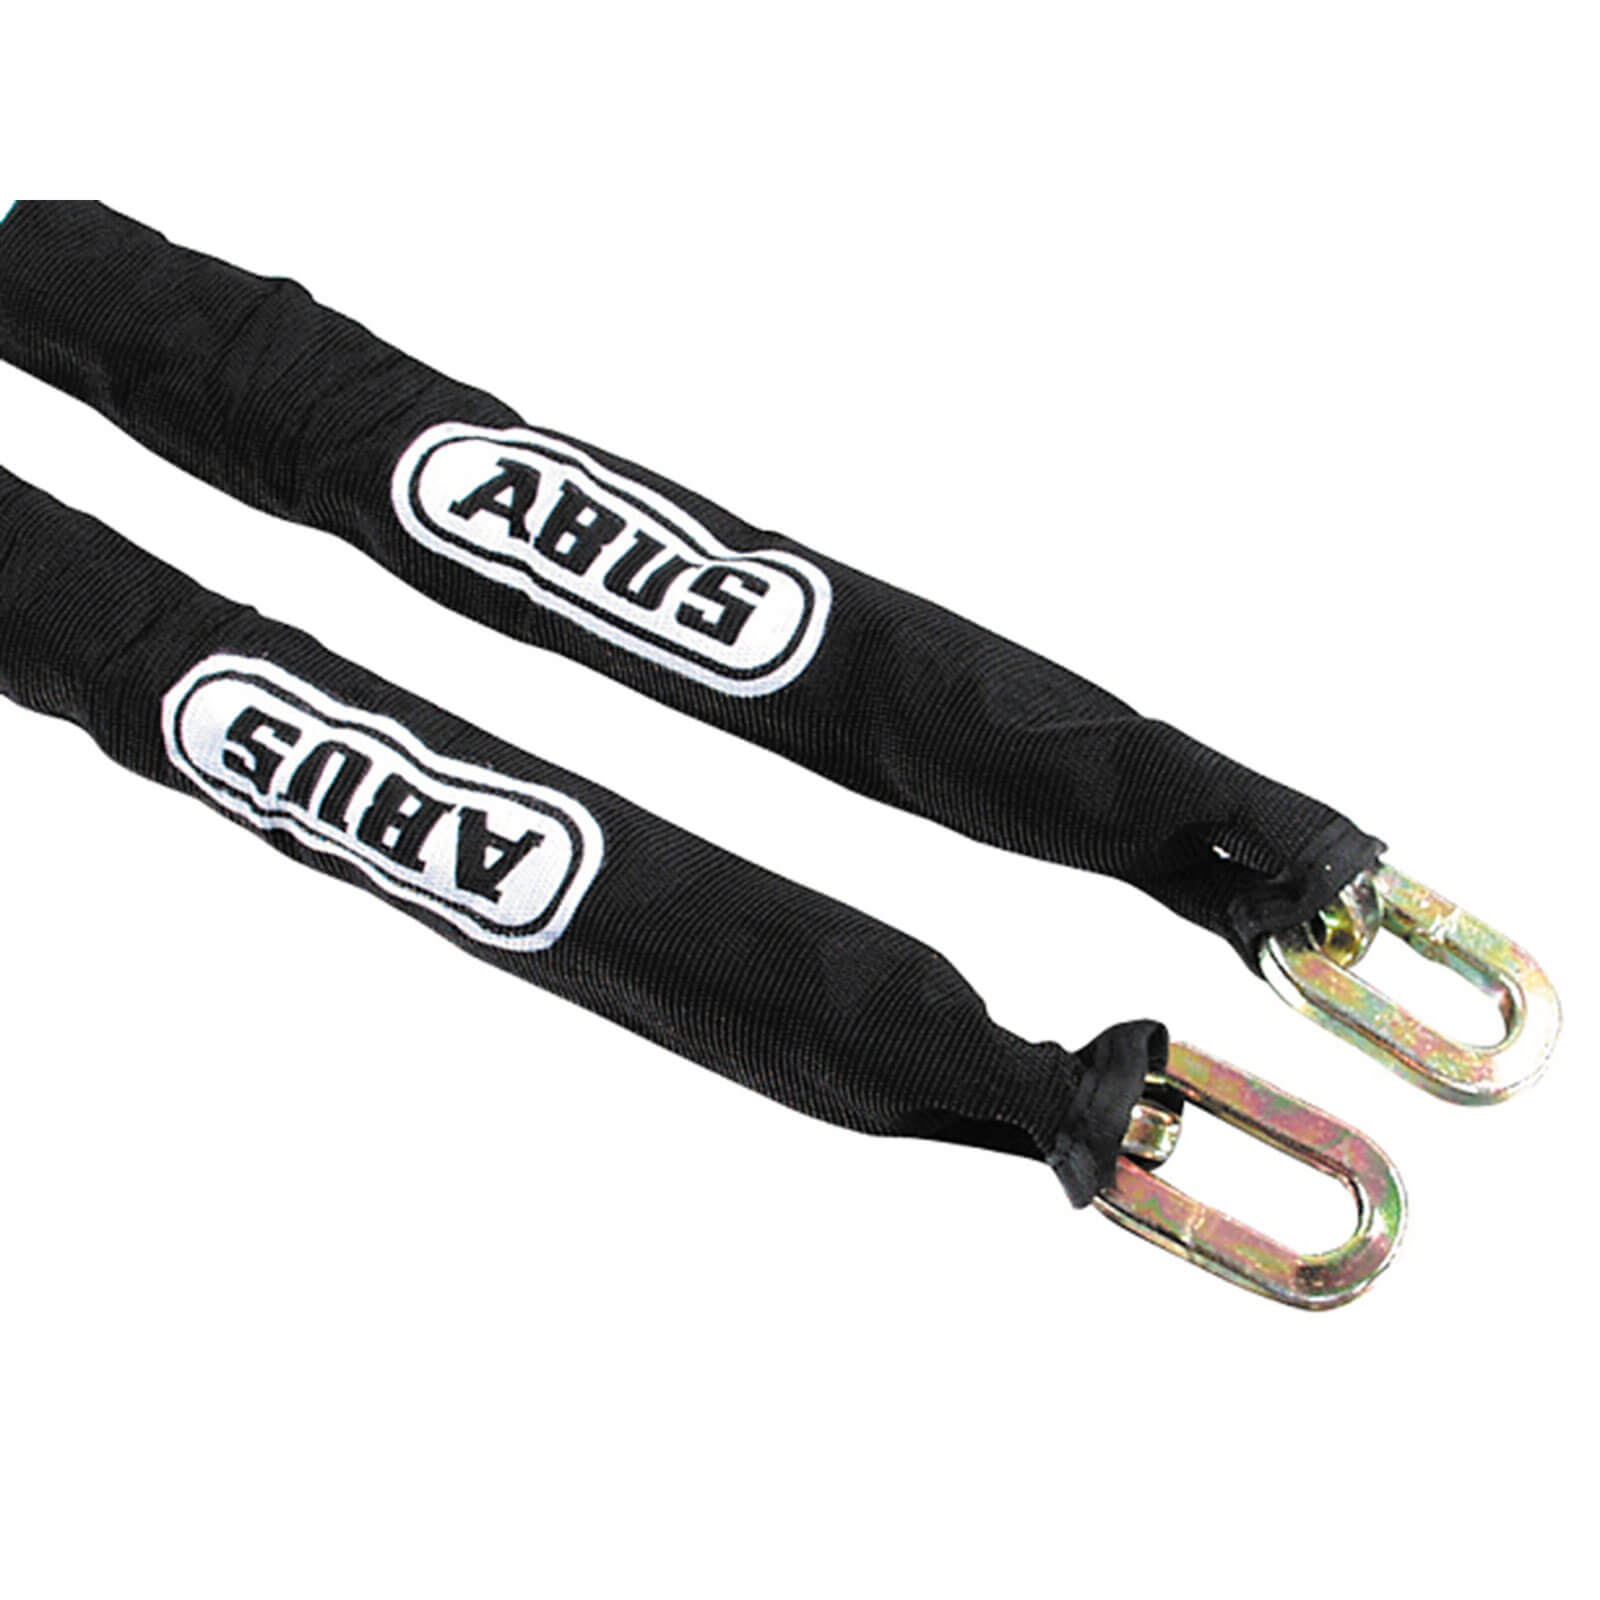 Image of Abus 10Ks 1400mm Hardened Security Chain 10mm Link Diameter